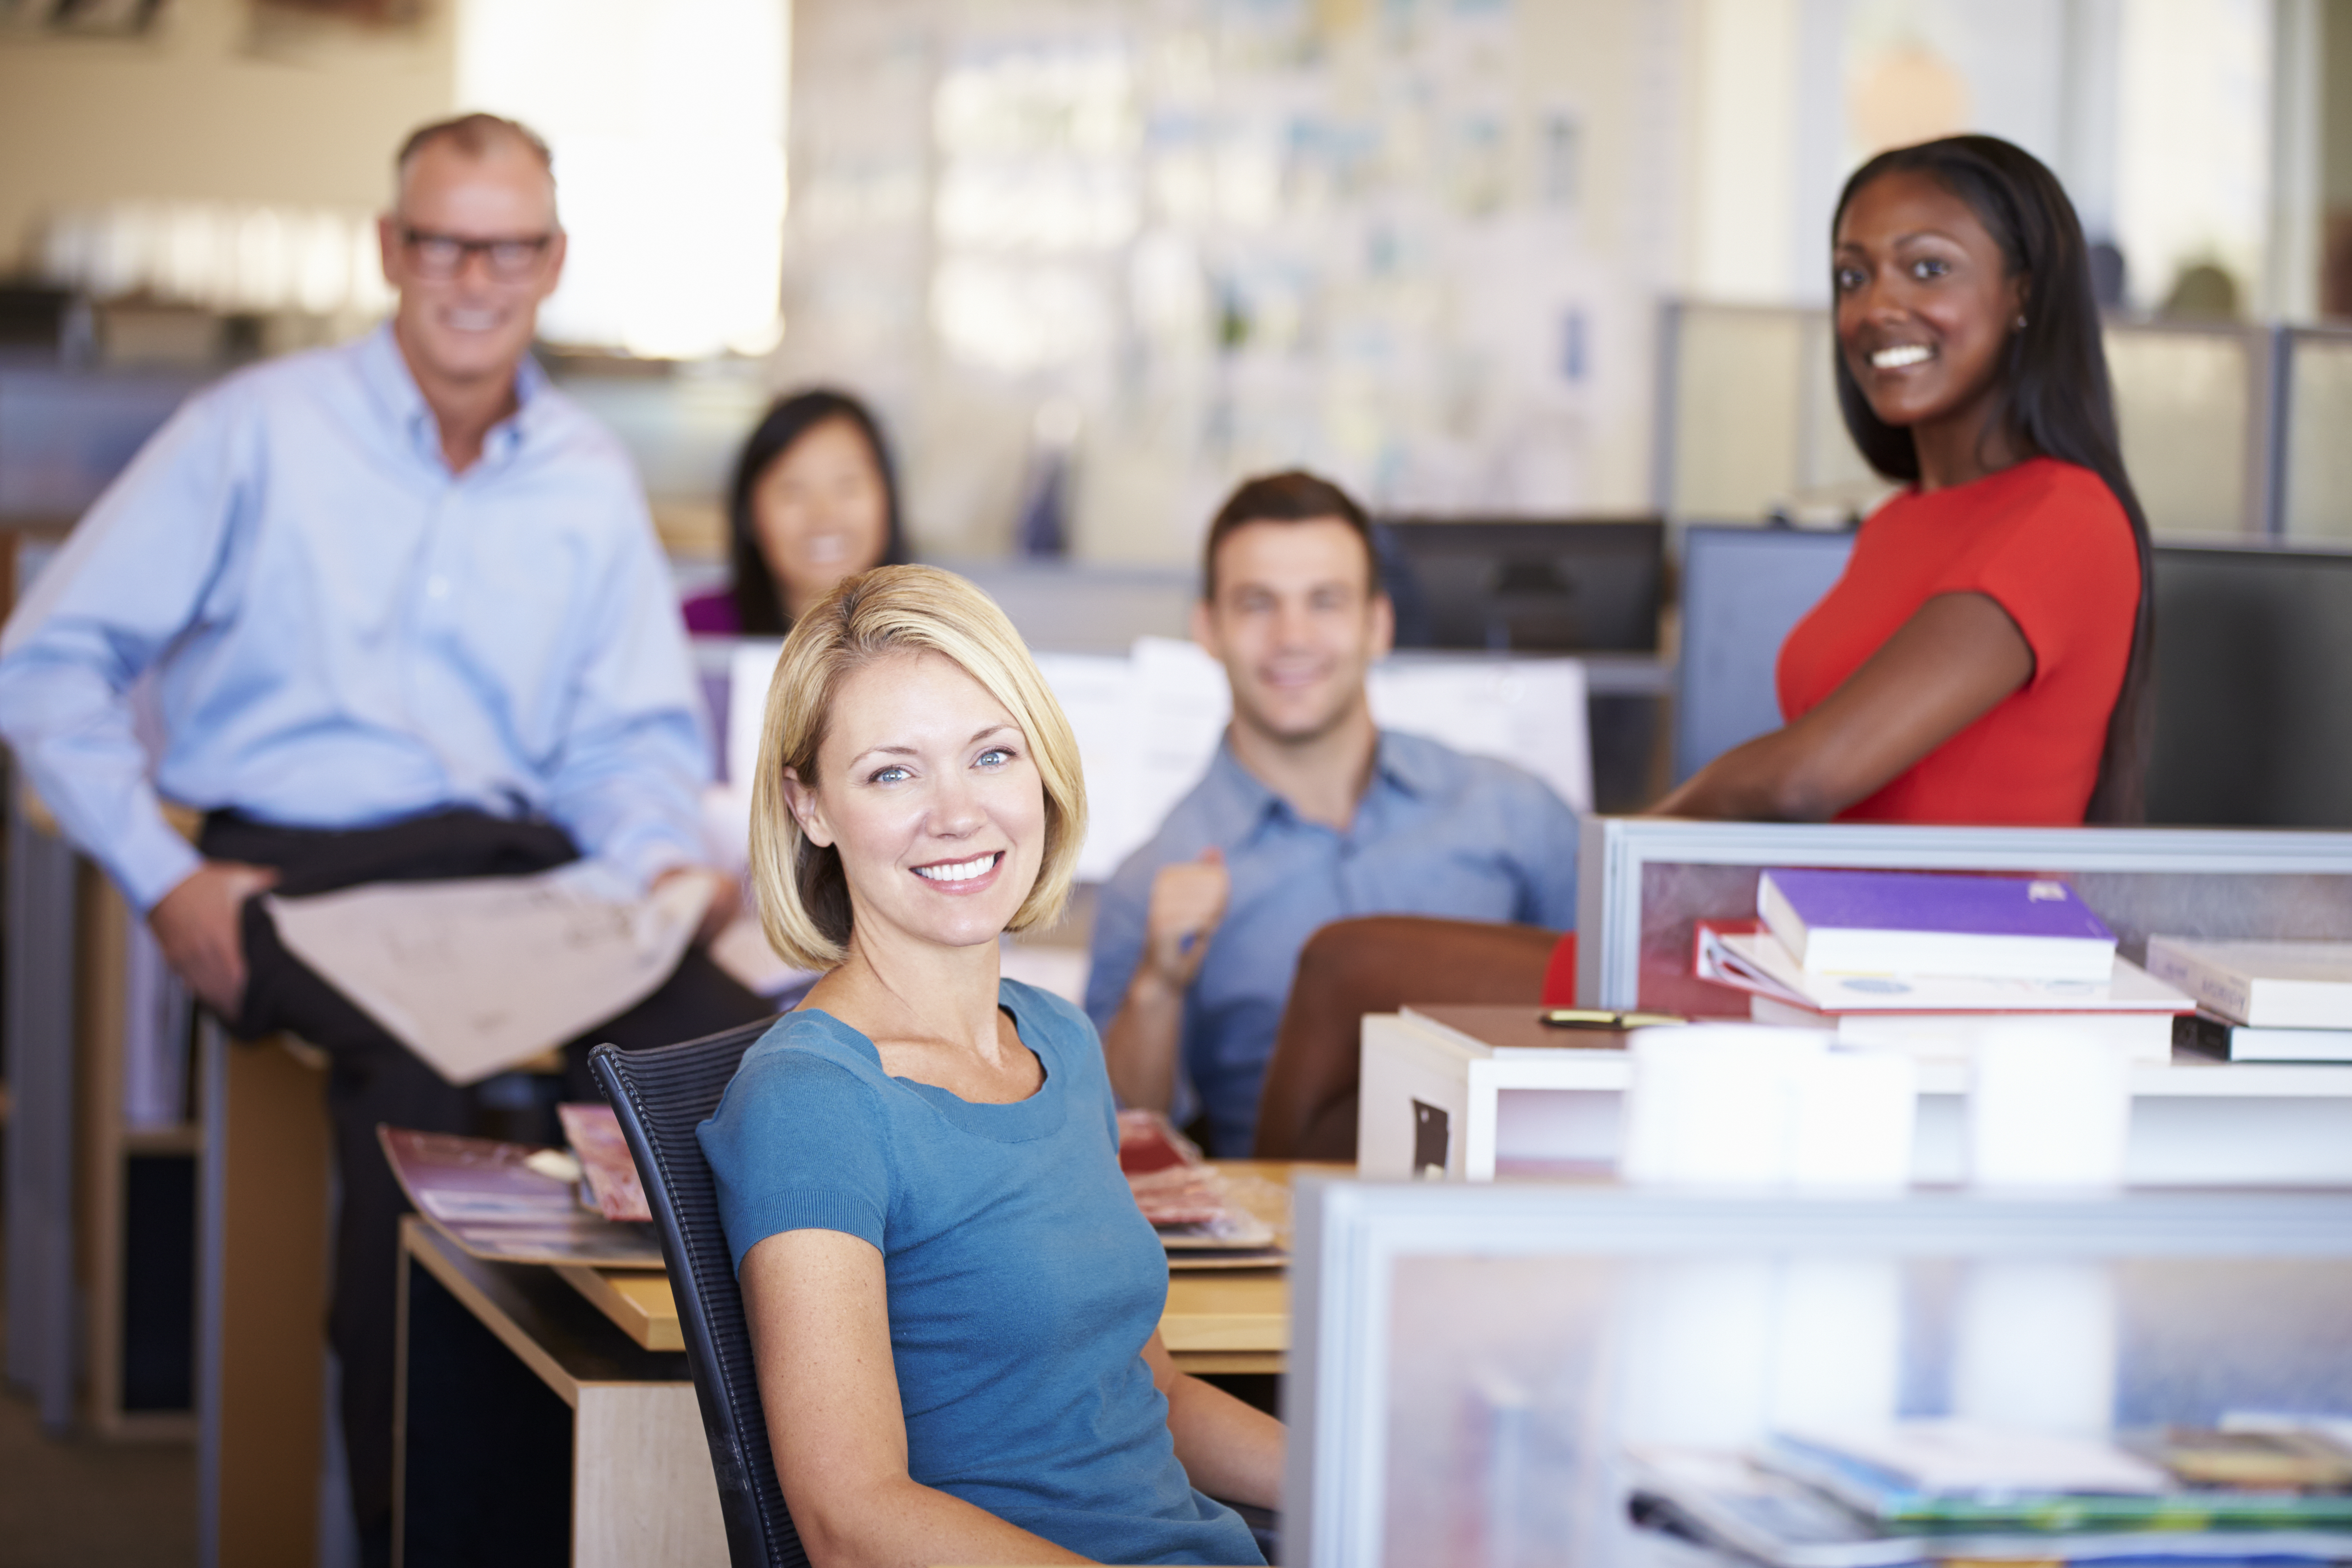  Best Workplaces for Millennials: How They Retain the Next Generation of Leaders